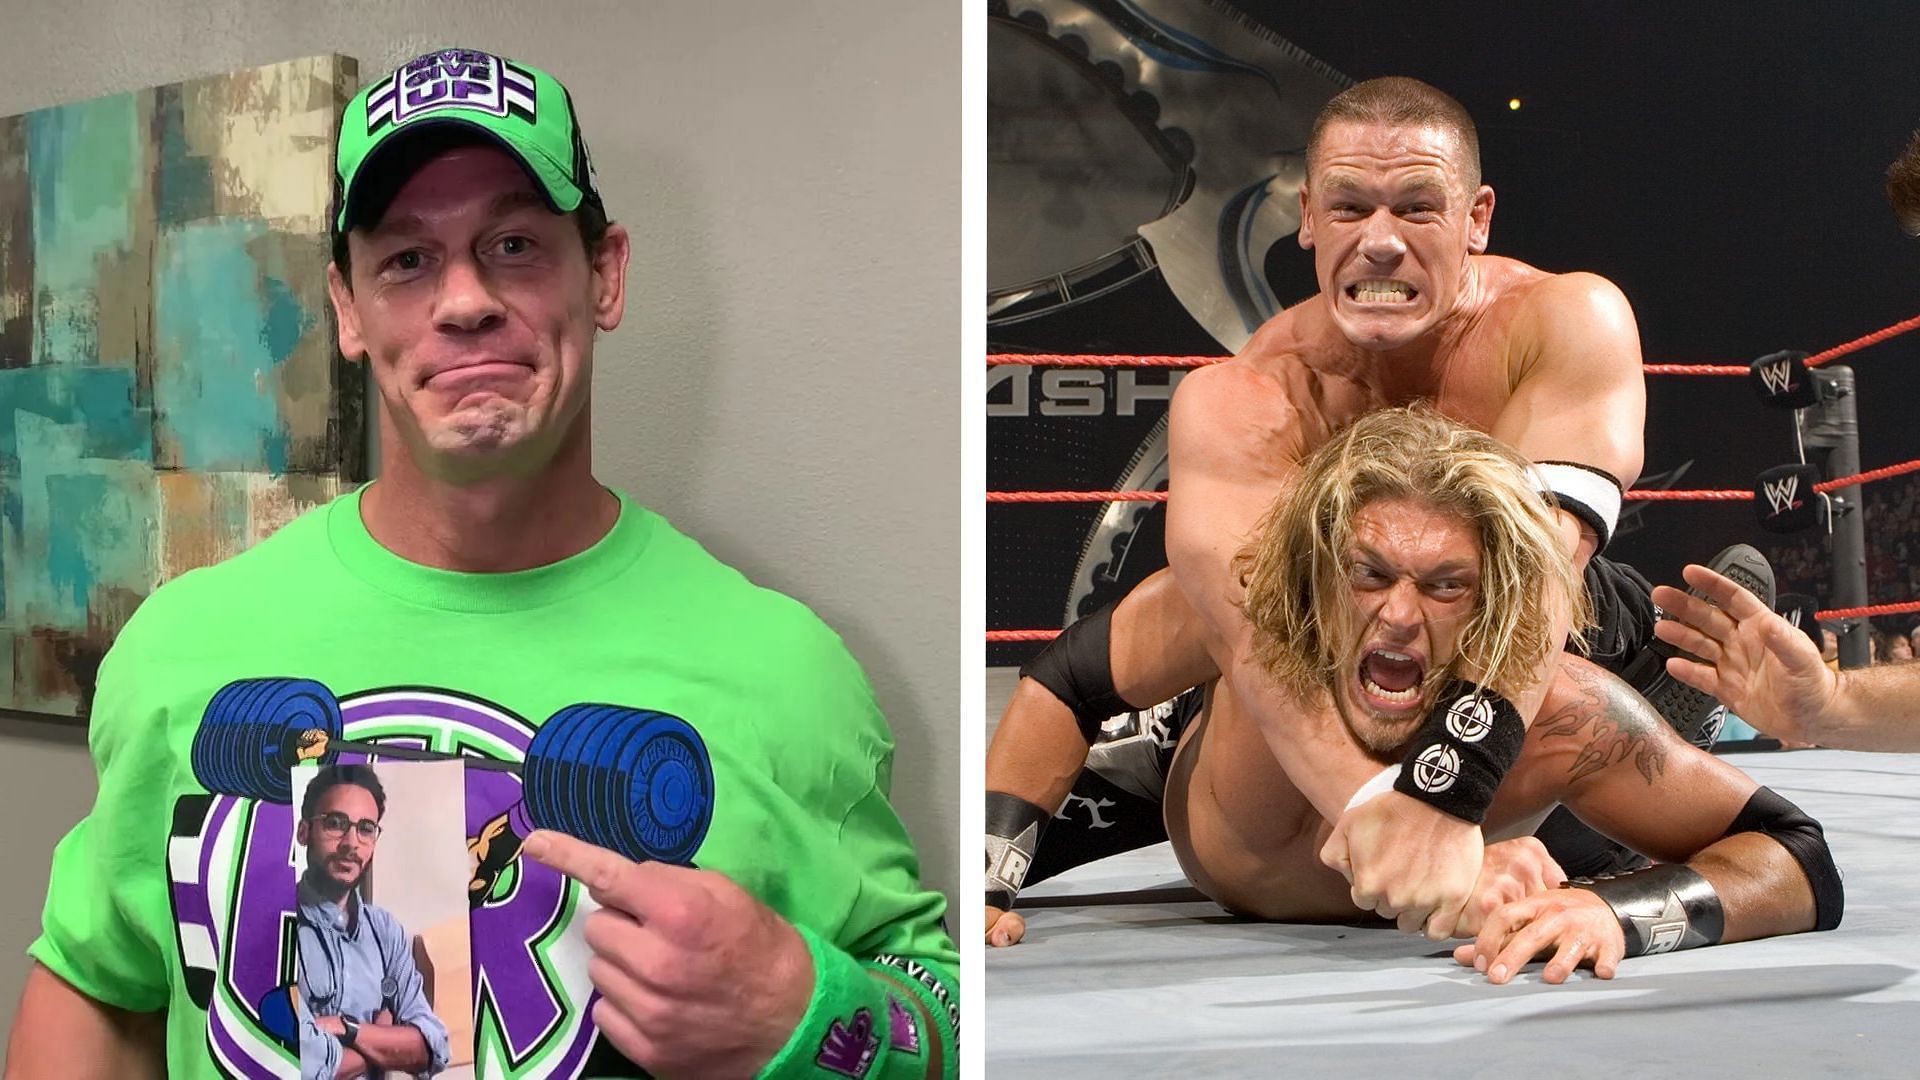 Could John Cena and Edge renew their rivalry in WWE?